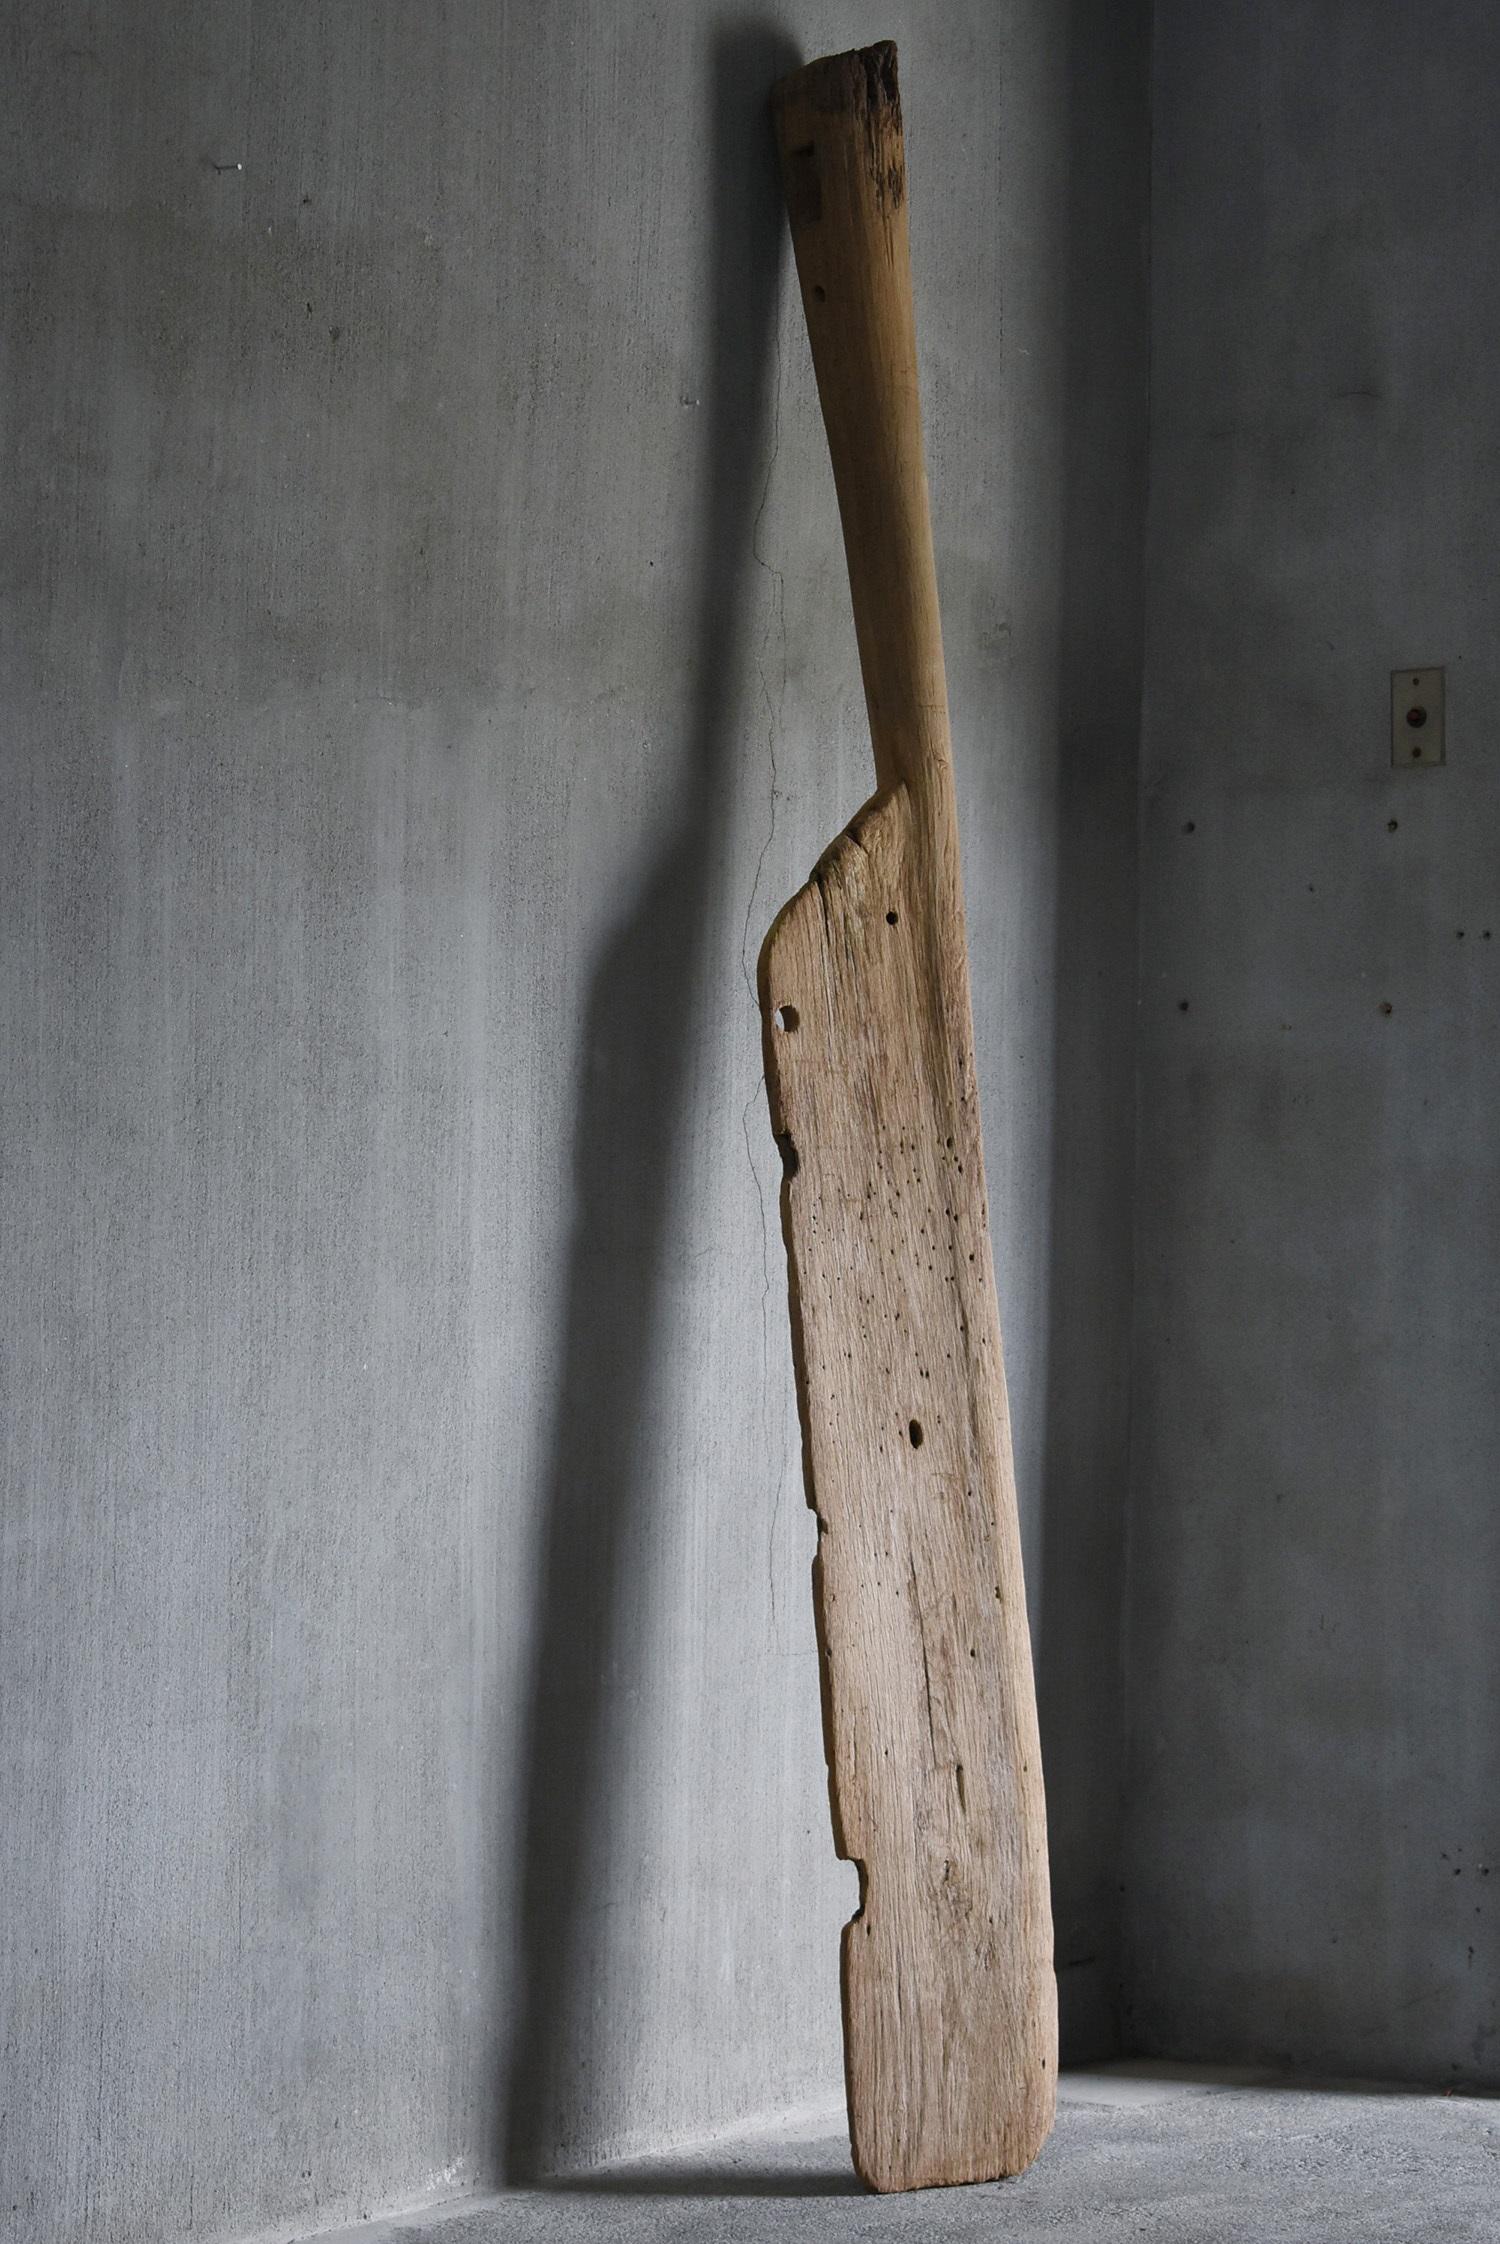 It is an oar of an old Japanese ship.
It is made of oak wood.
It is an item of 1800s-1900s.

It has a strong presence.
Please use it as an accent in the space.

It is rare.